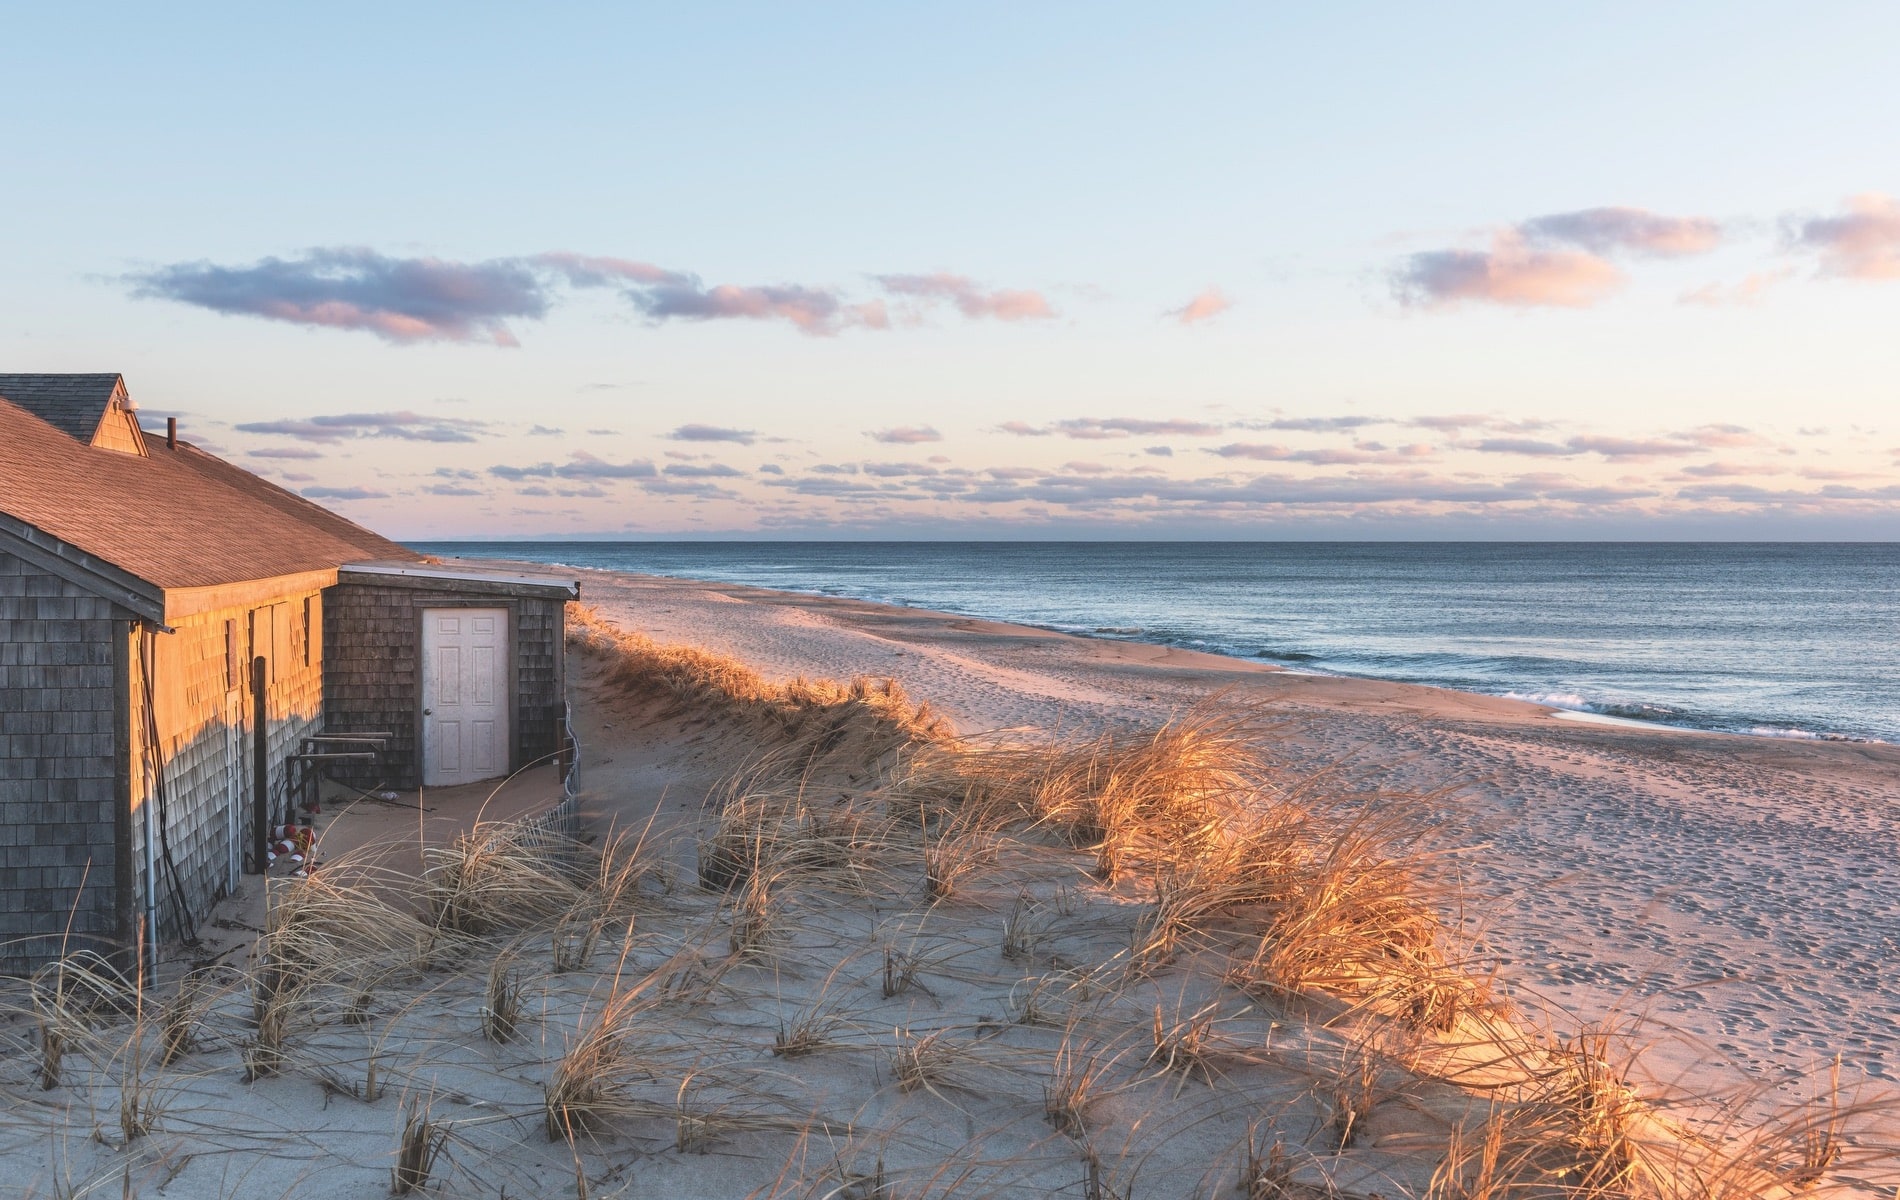 Cape Cod – A Fondness for Sand Dunes and Salty Air